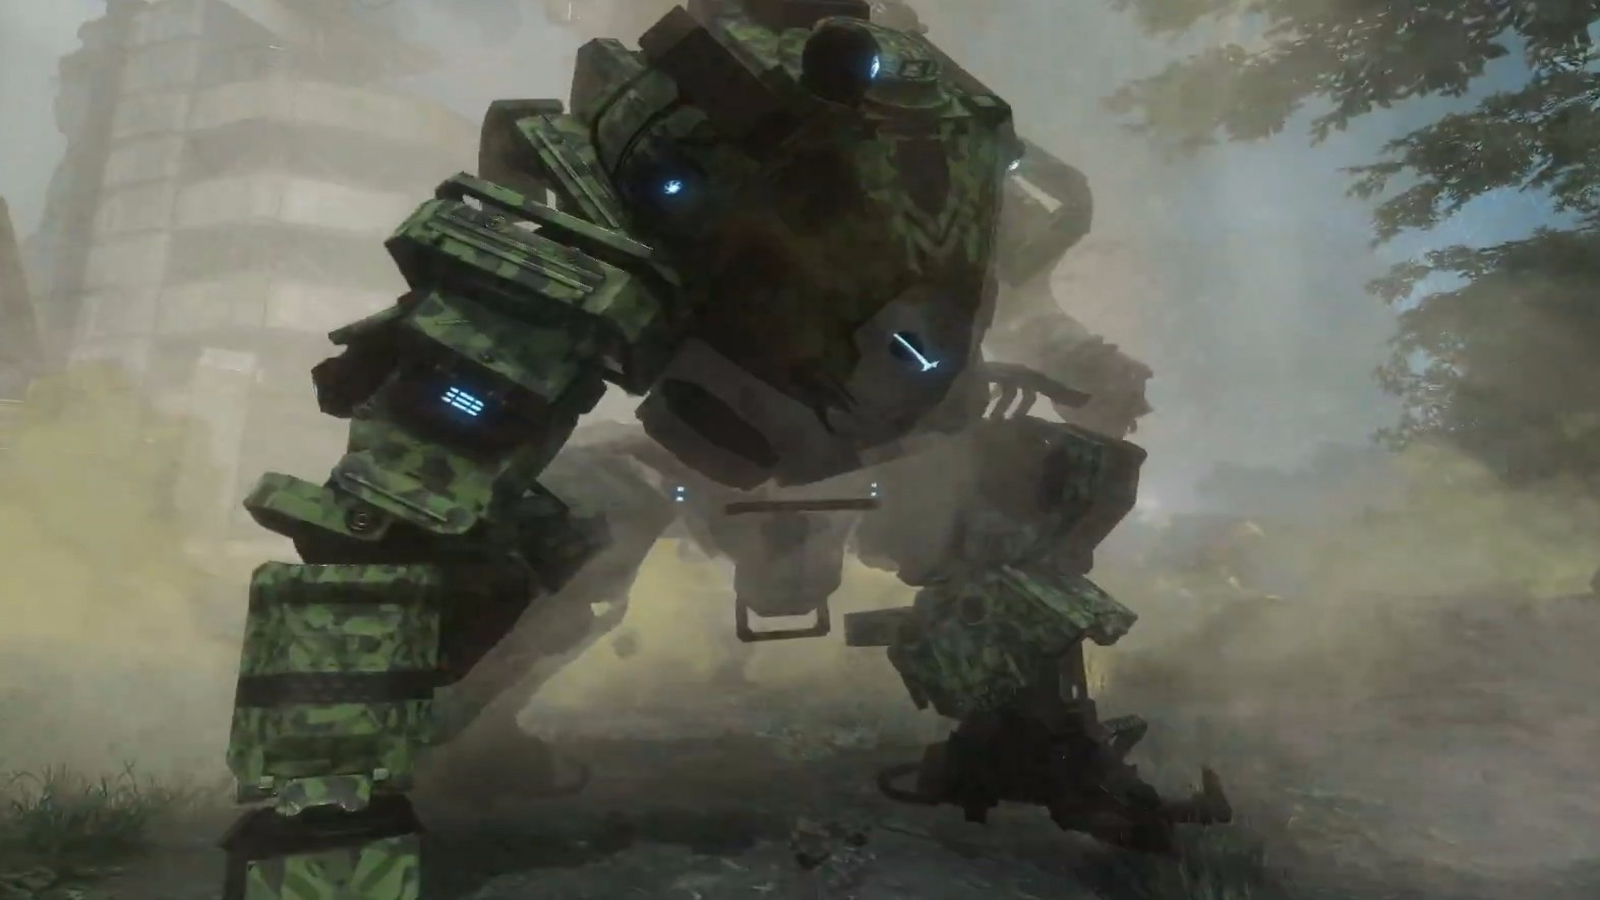 Titanfall 2 Multiplayer Hands-on Preview